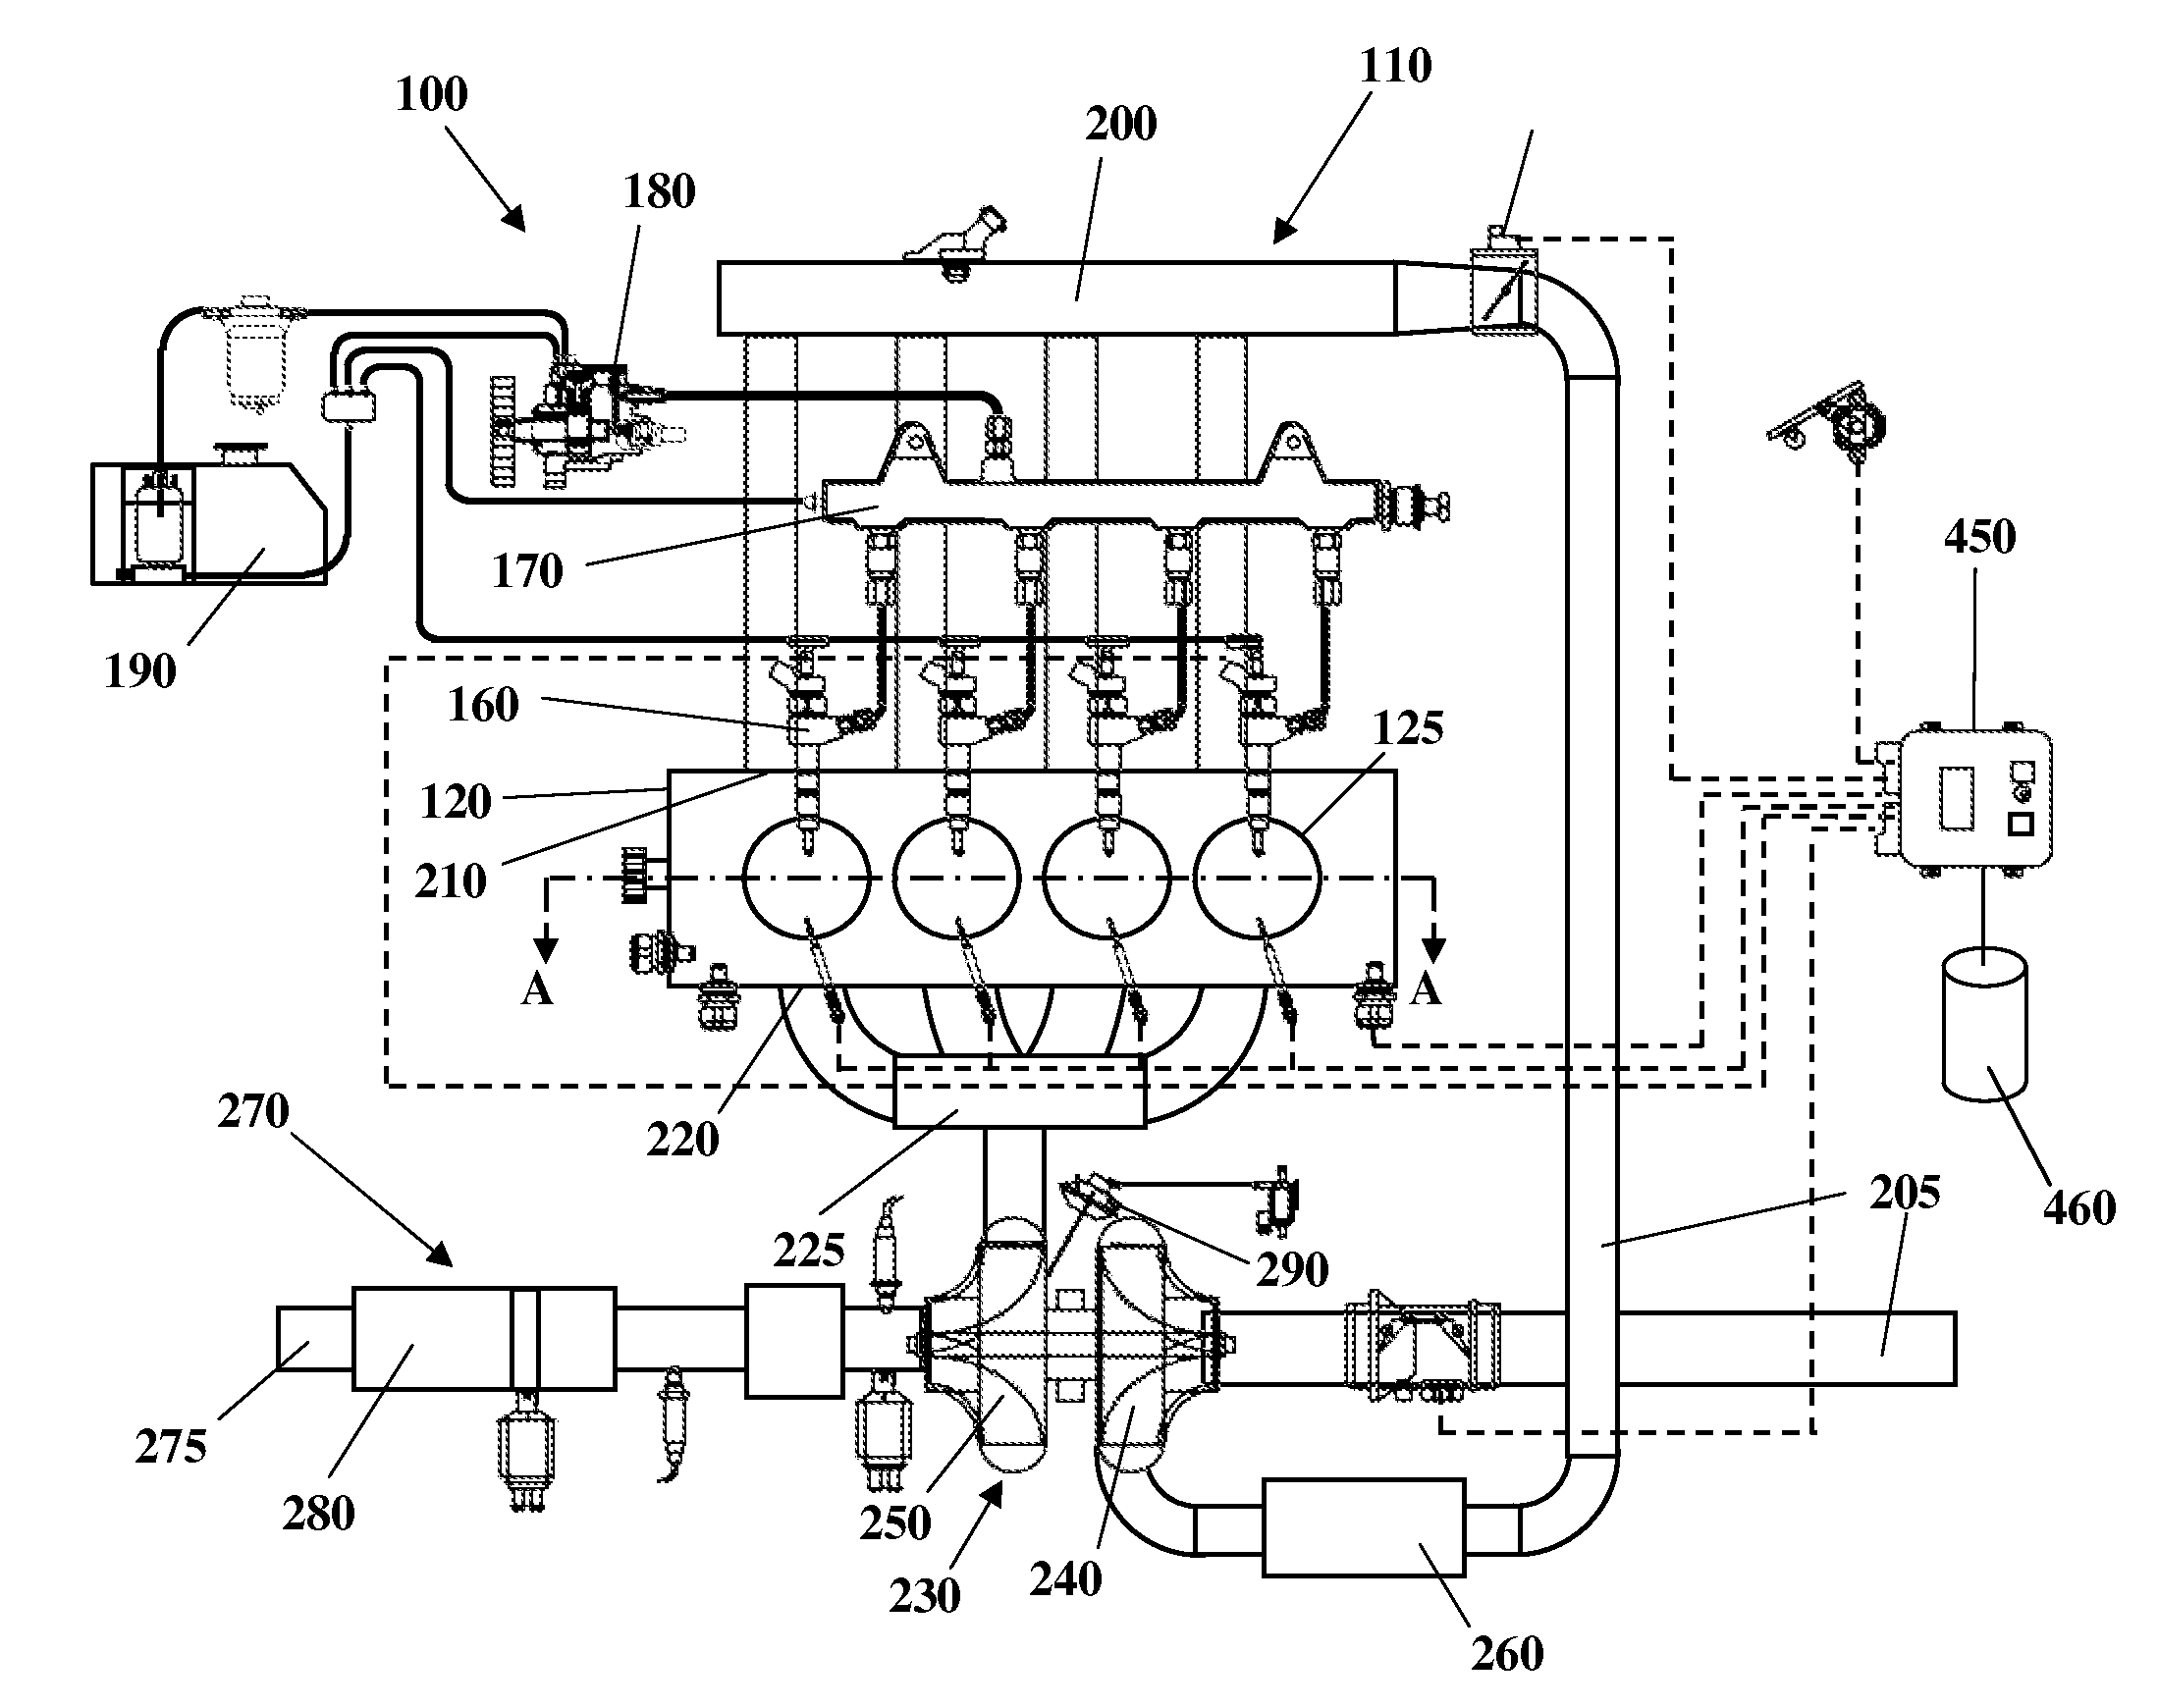 Exhaust gas recirculation system for an internal combustion engine